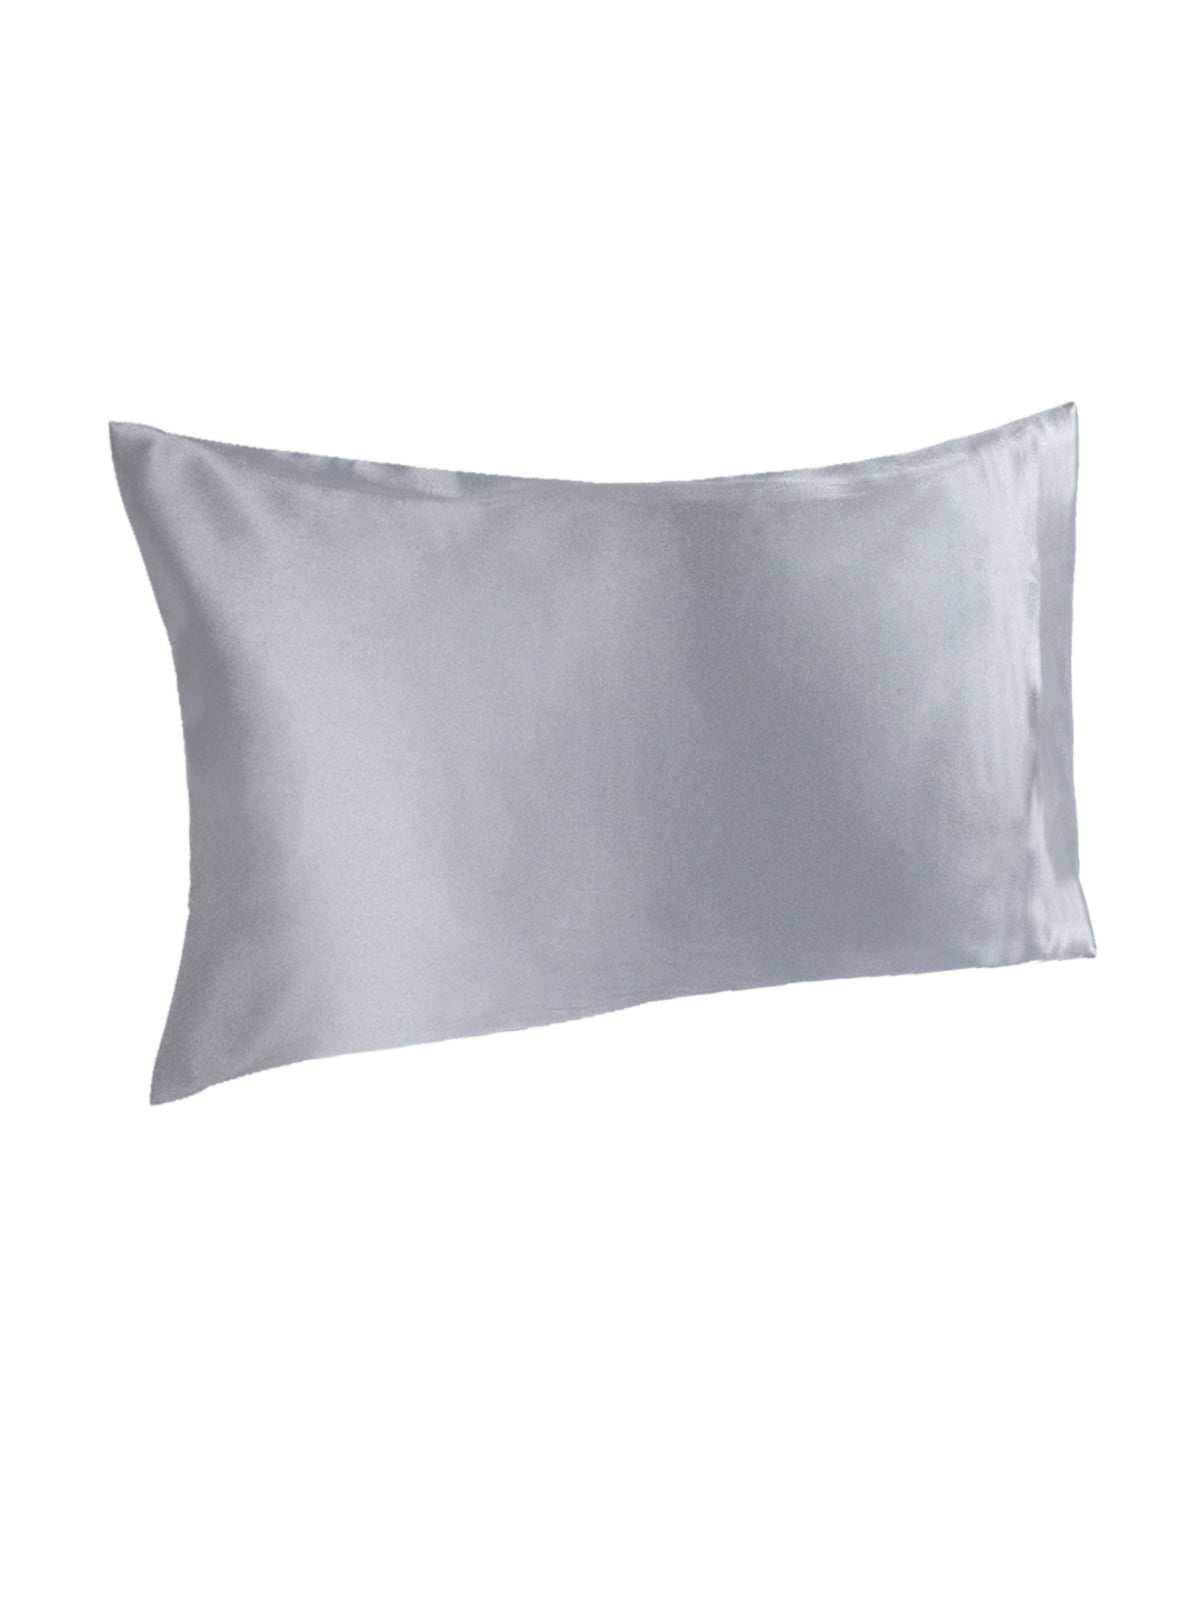 Silver Set of 2 Solid Patterned Pillow Covers